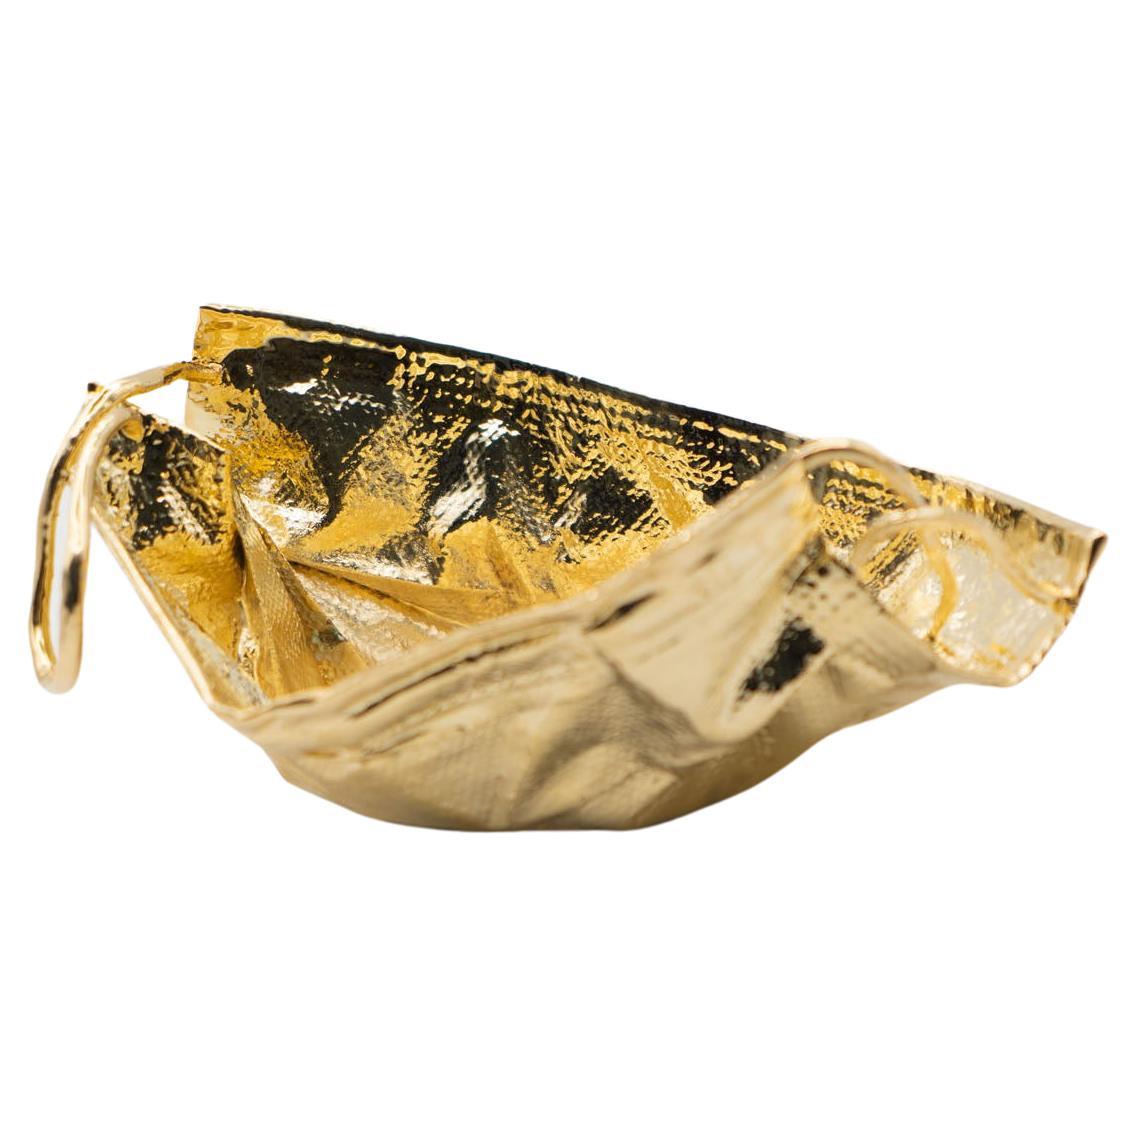 Remask Act 017 Gold Art Objects for Objects for Masks par Enrico Girotti